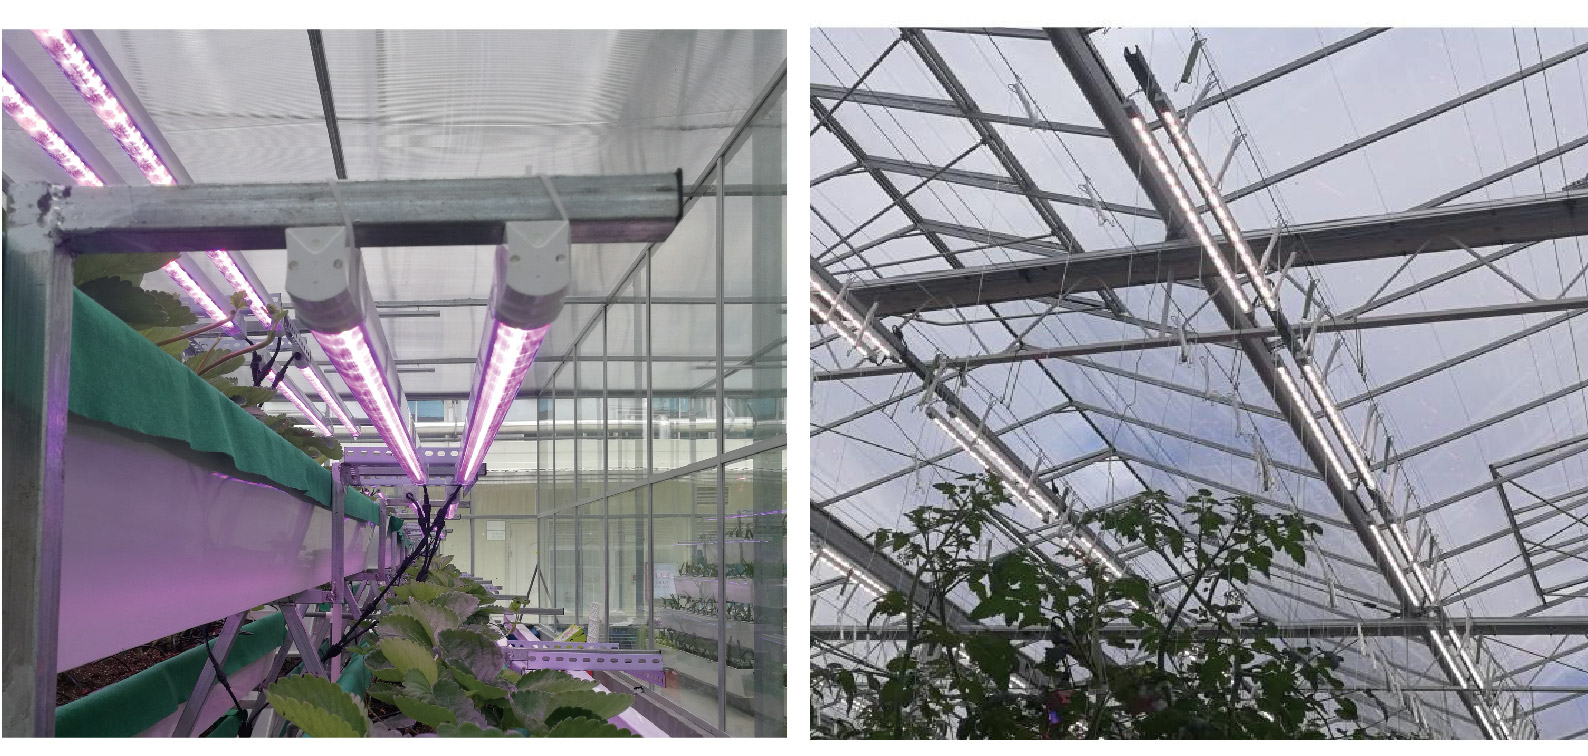 Linear Toplight LED Light fixture for indoor & Greenhouse Solution